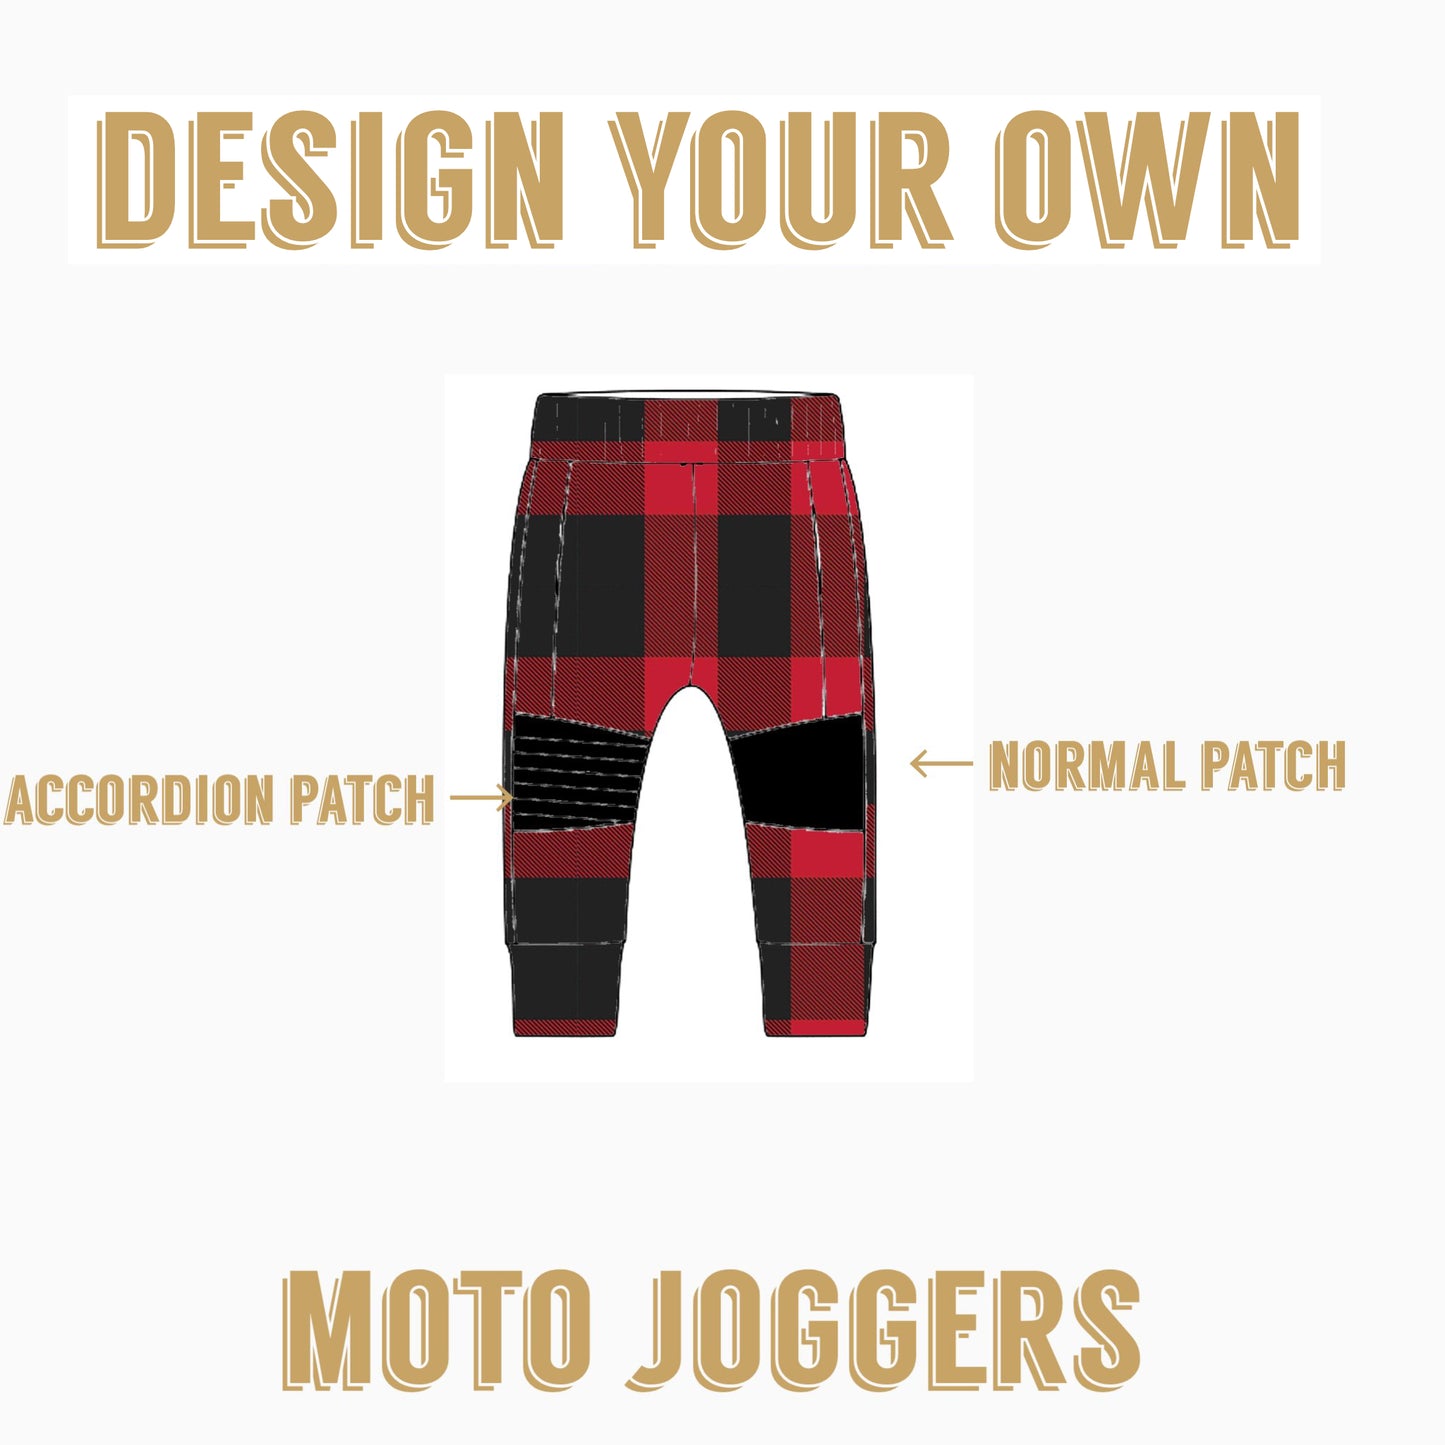 Design Your Own | moto Joggers